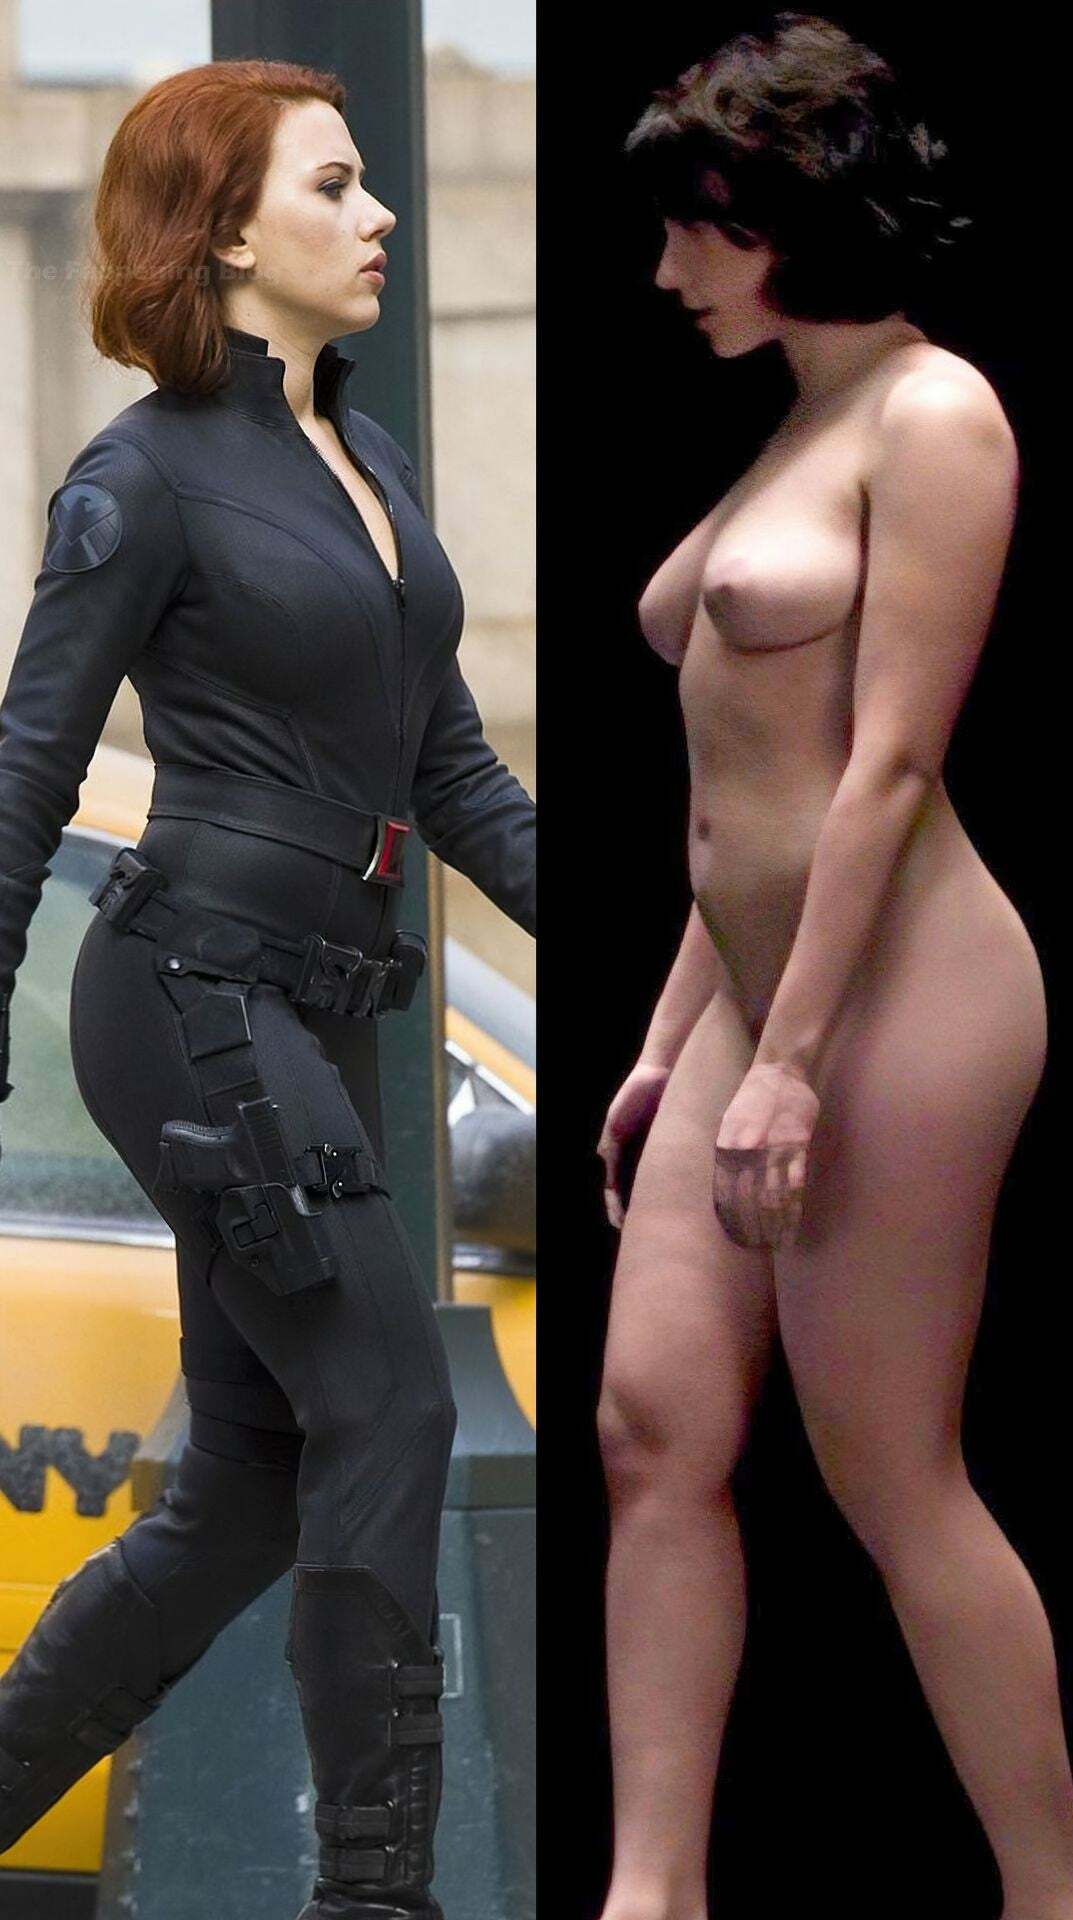 Scarlett Johansson looking perfect to just bend over